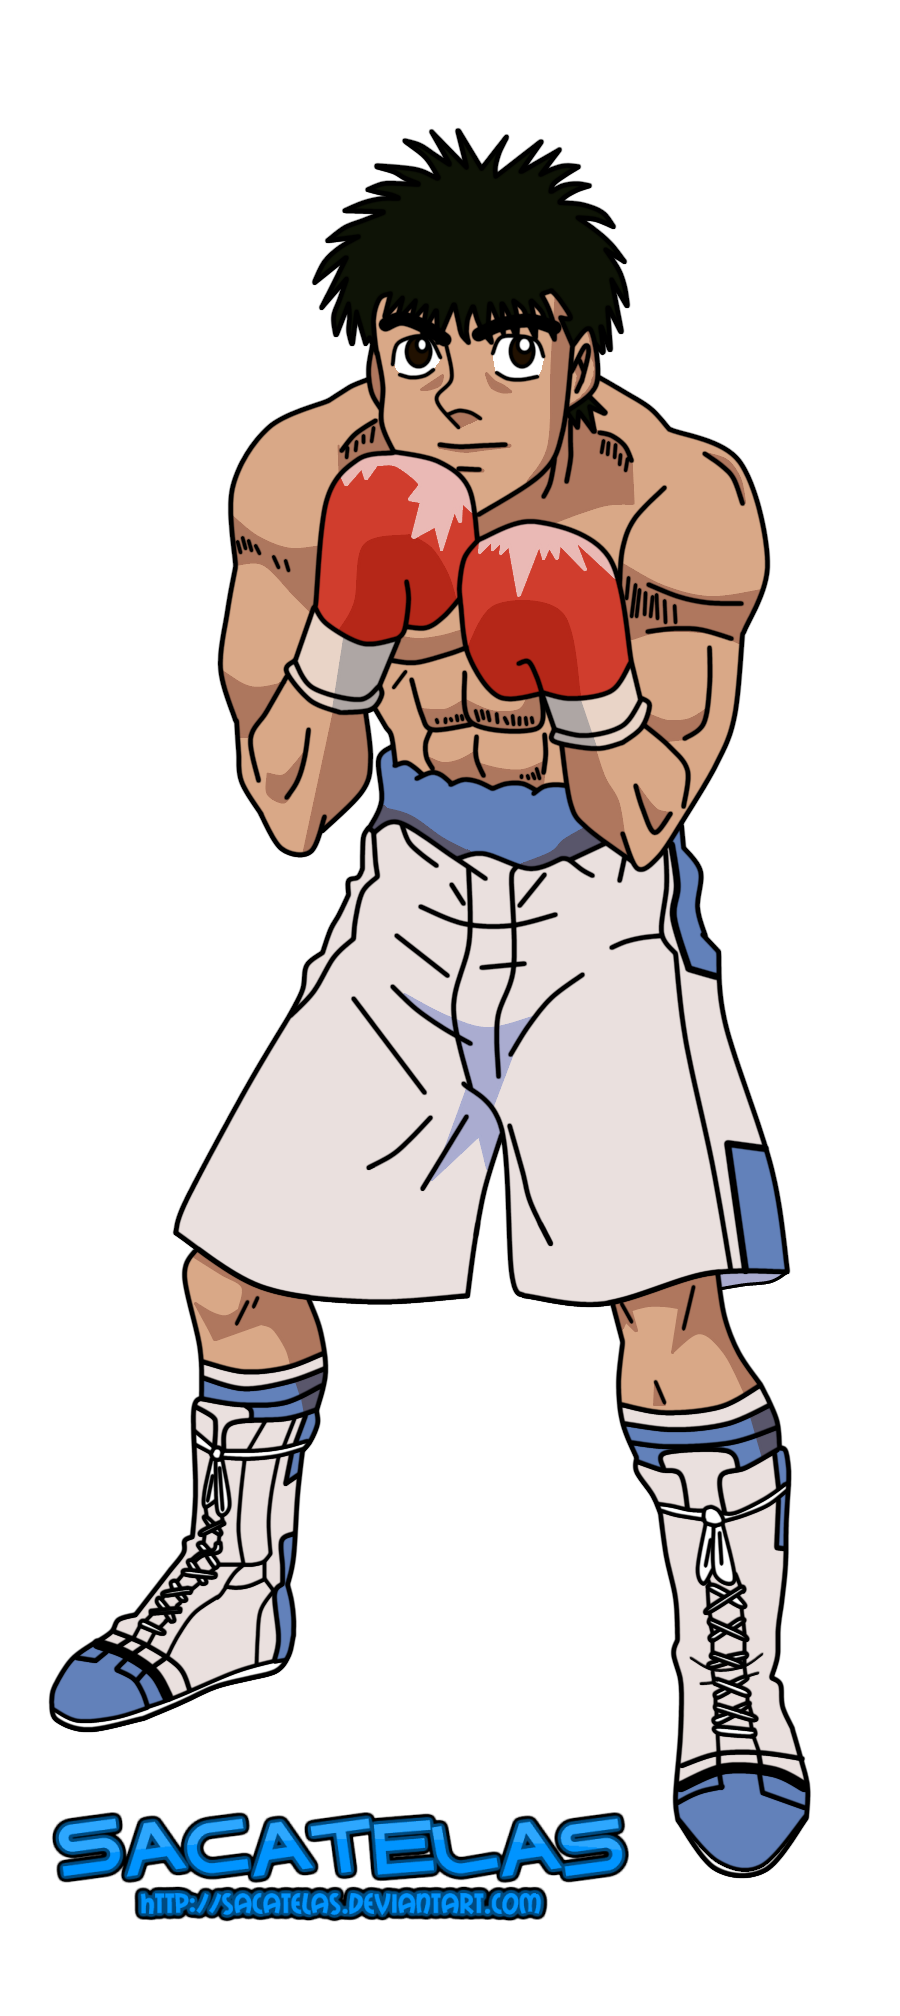 Anime Icon Pack , Hajime no Ippo ( ) transparent background PNG clipart